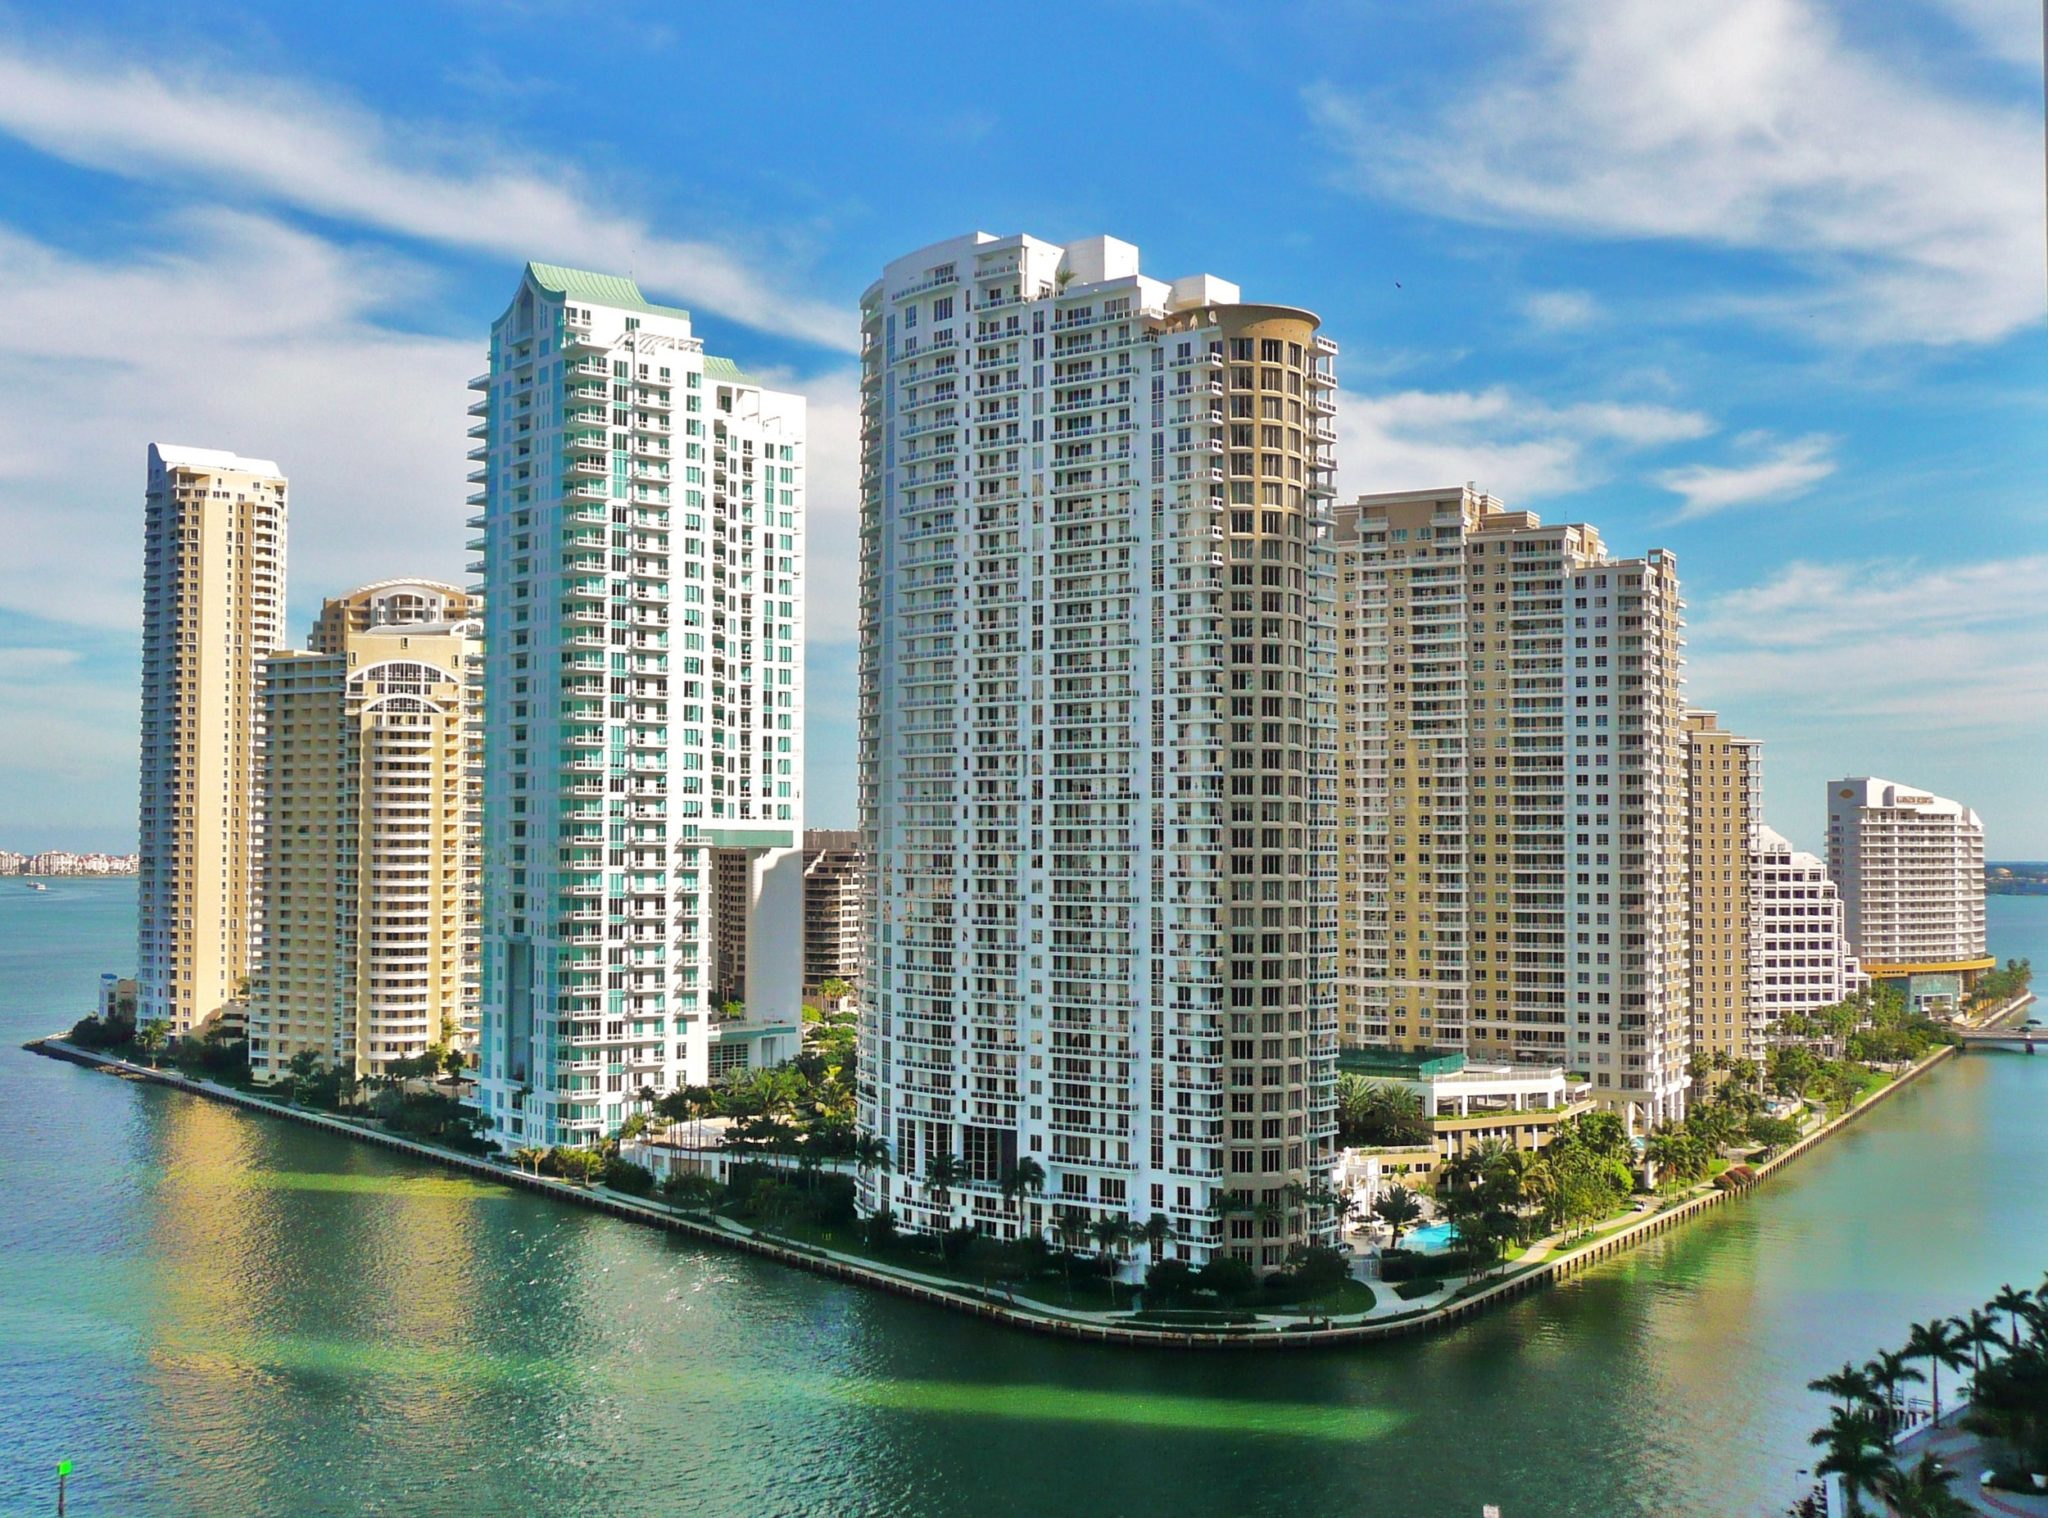 Reasons Miami’s real estate market will thrive in 2017